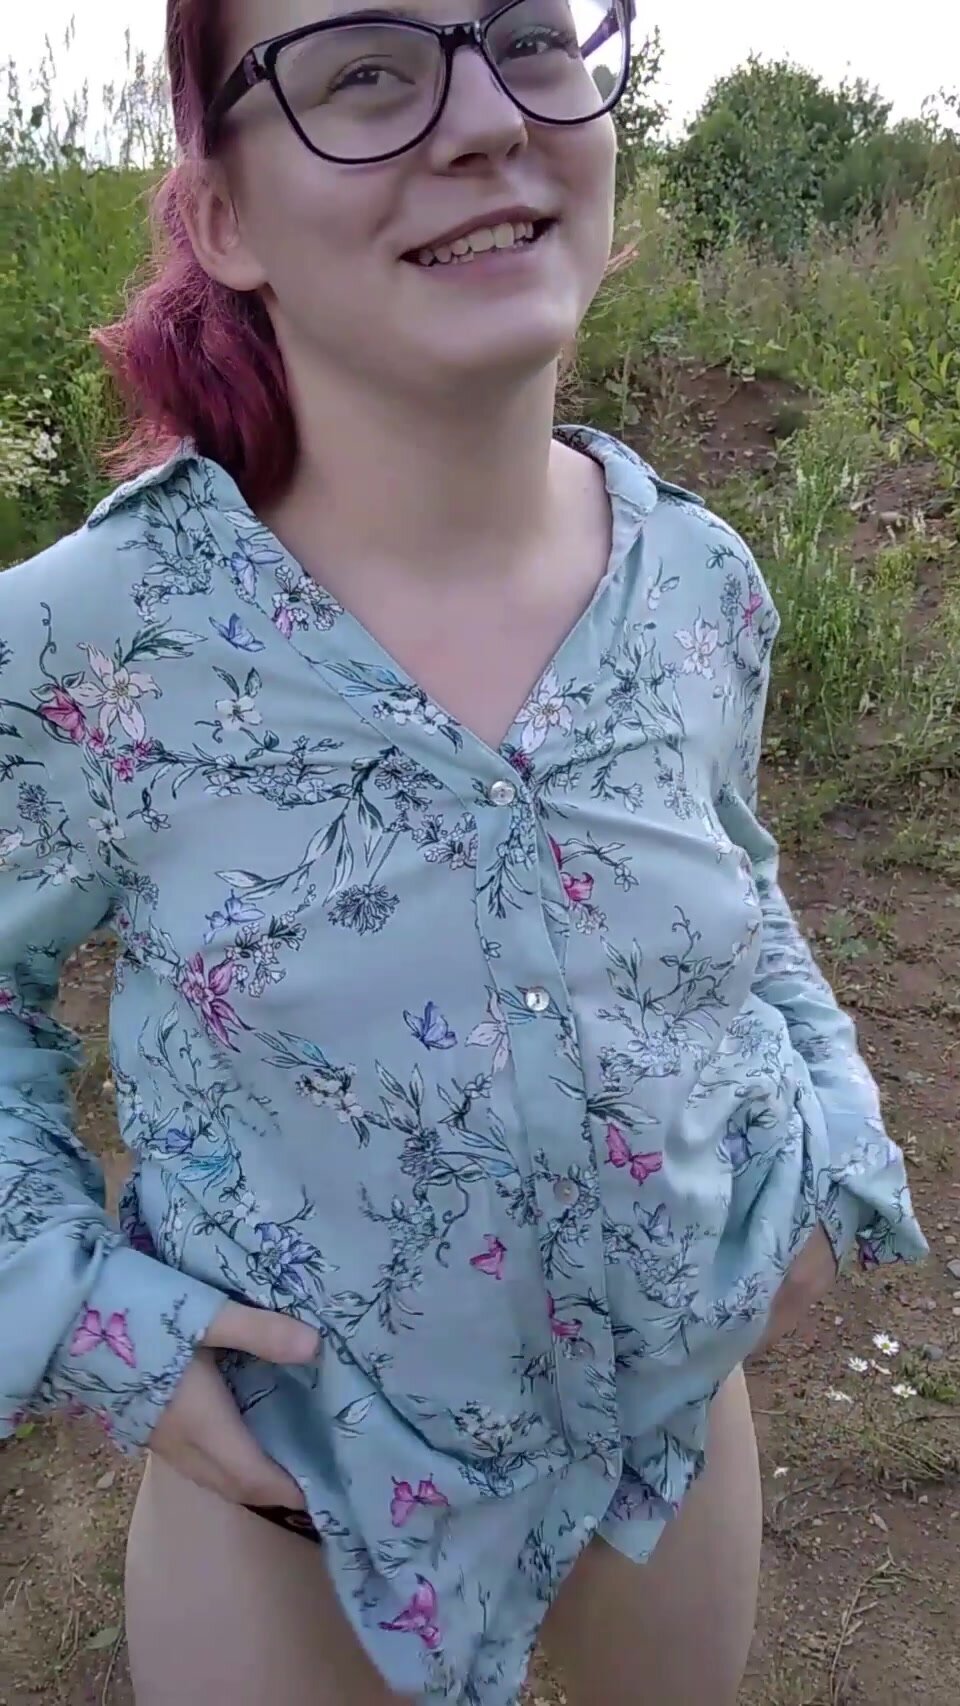 I'm just flashing boobs in a public park :3